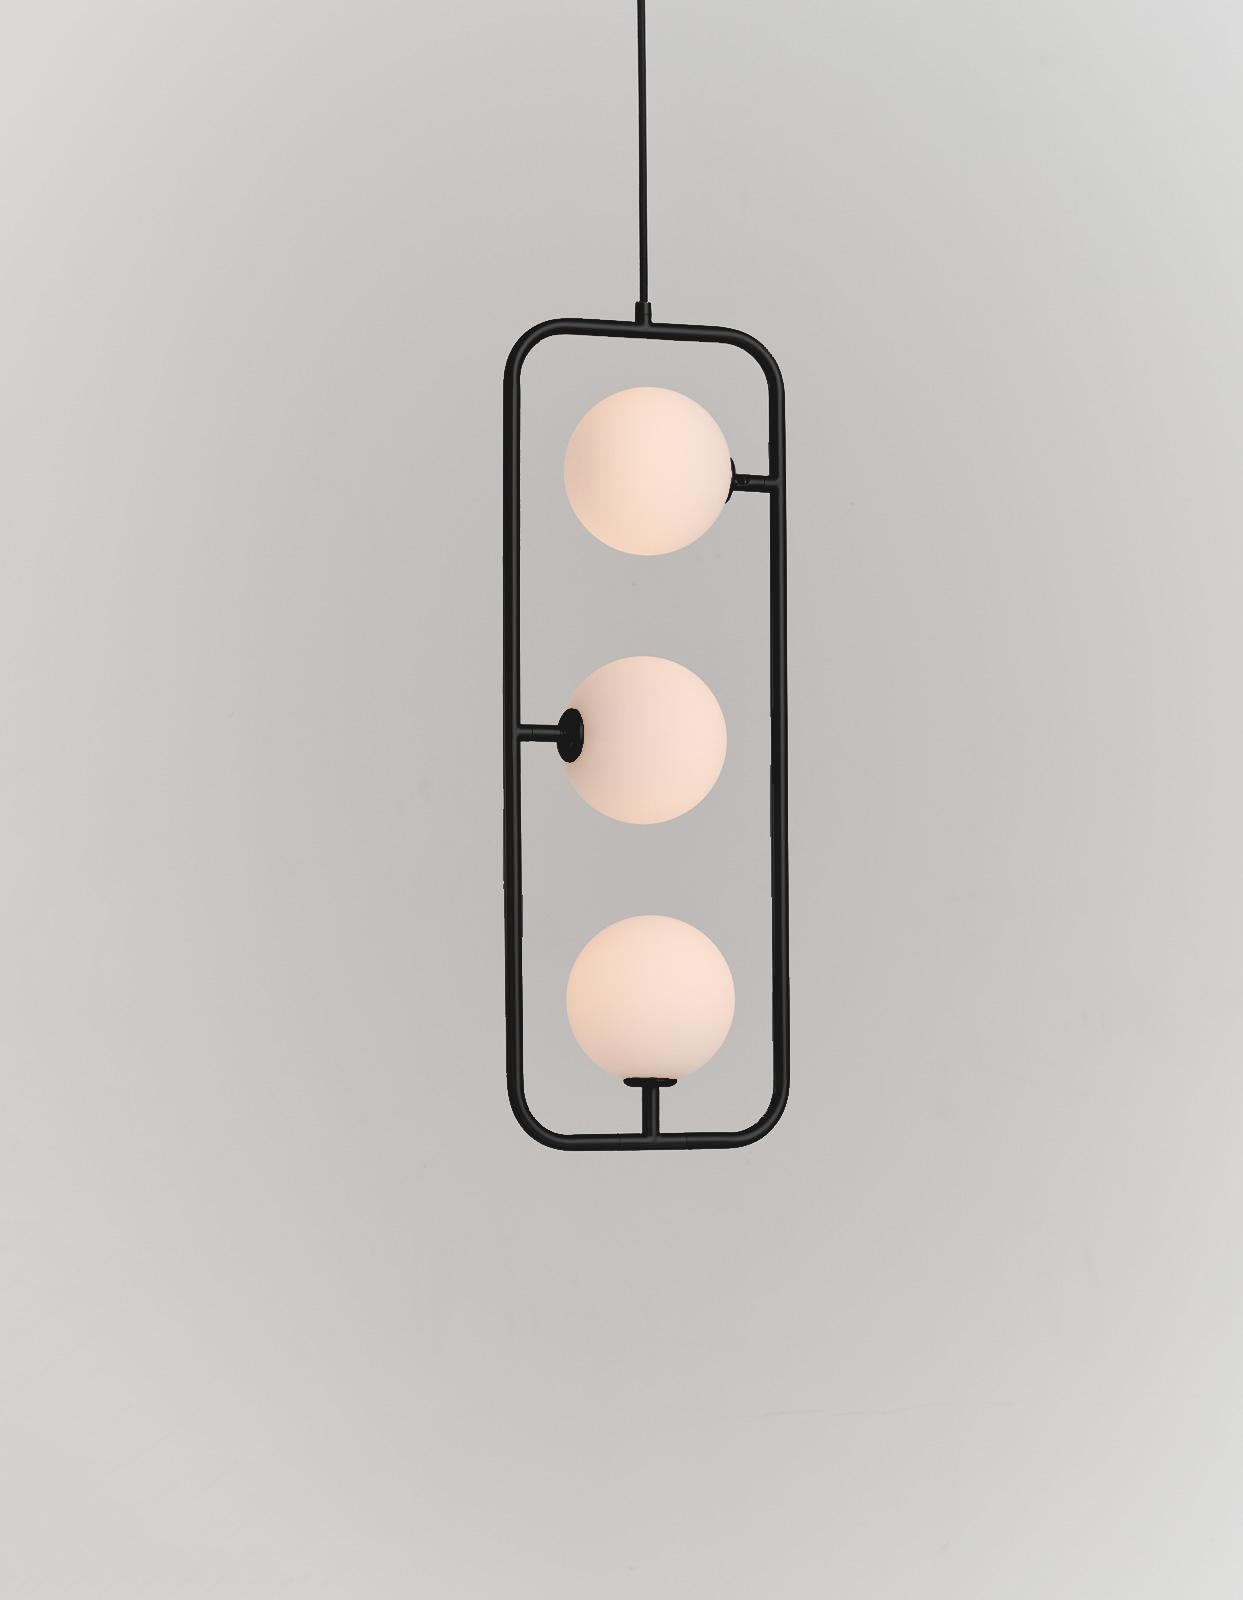 Sircle Pendant PV3, a symbolization merged Square and Circle, inspired by the East aesthetic philosophy, the circular light ball just like a soft tender mind leans on the rigid prudent frame, chemically shaped a harmonious feature with its flexible